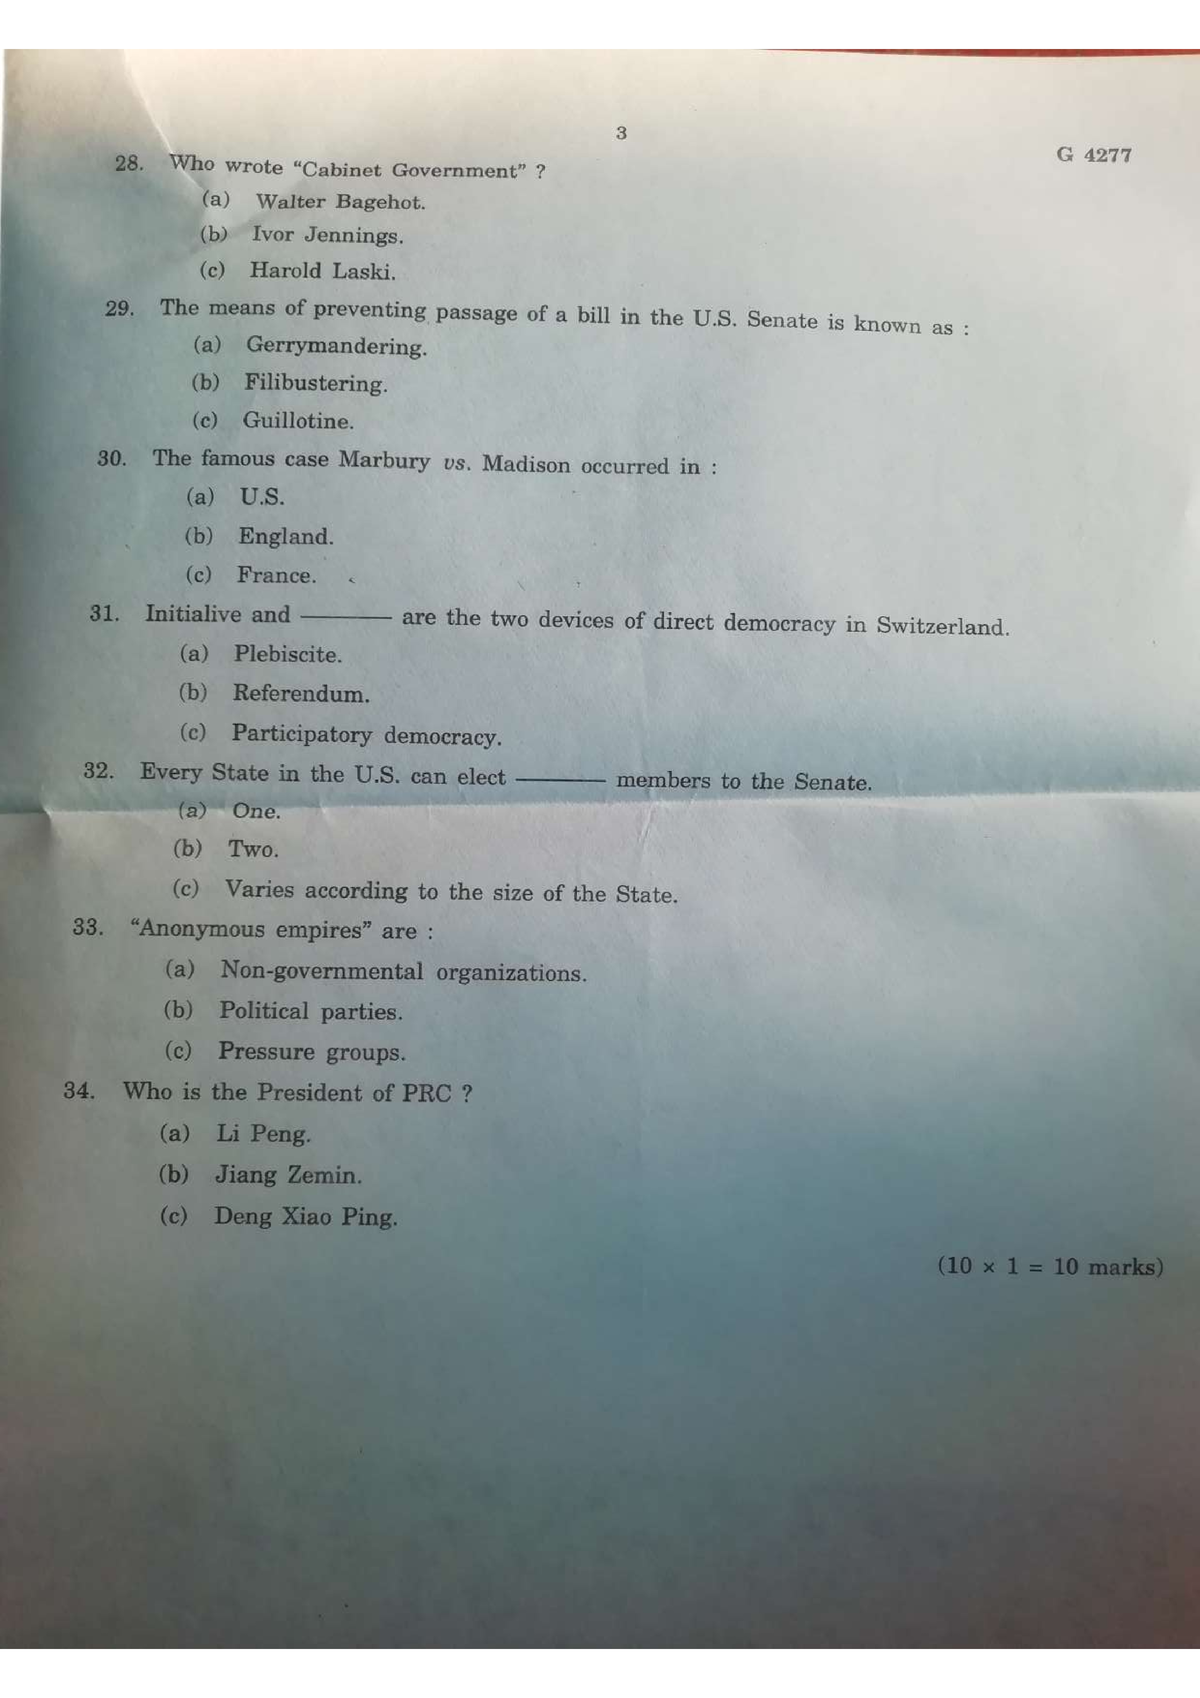 du phd political science previous year question papers